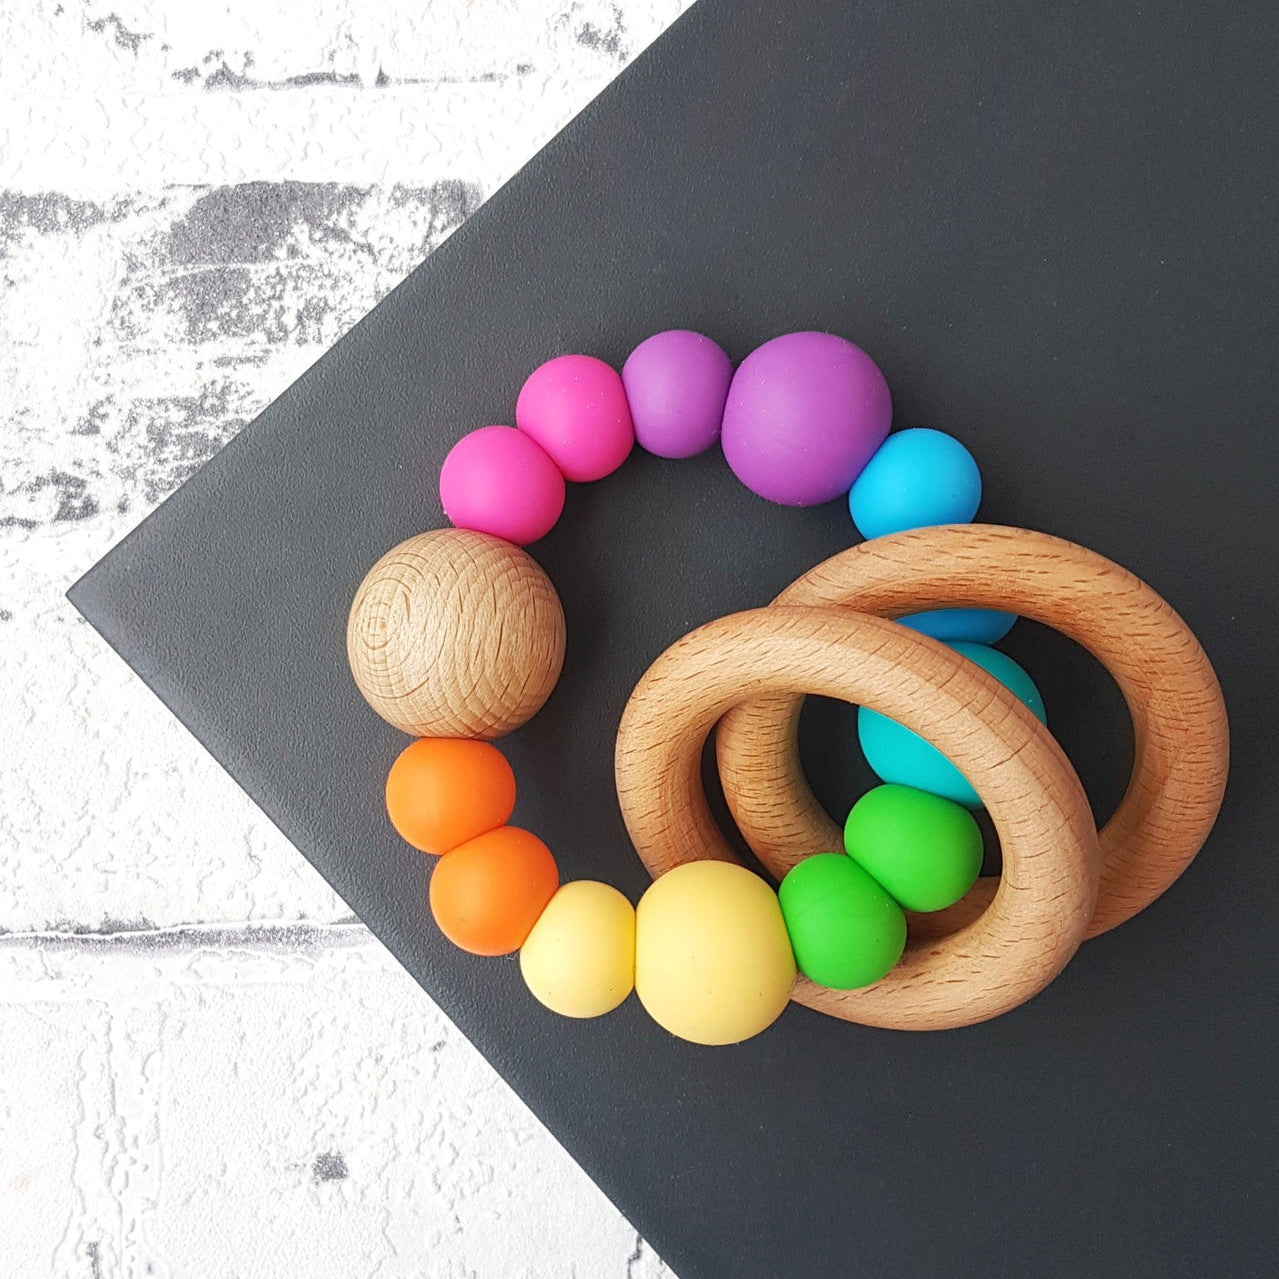 Teether/sensory toy featuring 2 wooden rings that rattle. Handmade from silicone and natural wood. Pastel and muted rainbow. Bright rainbow.